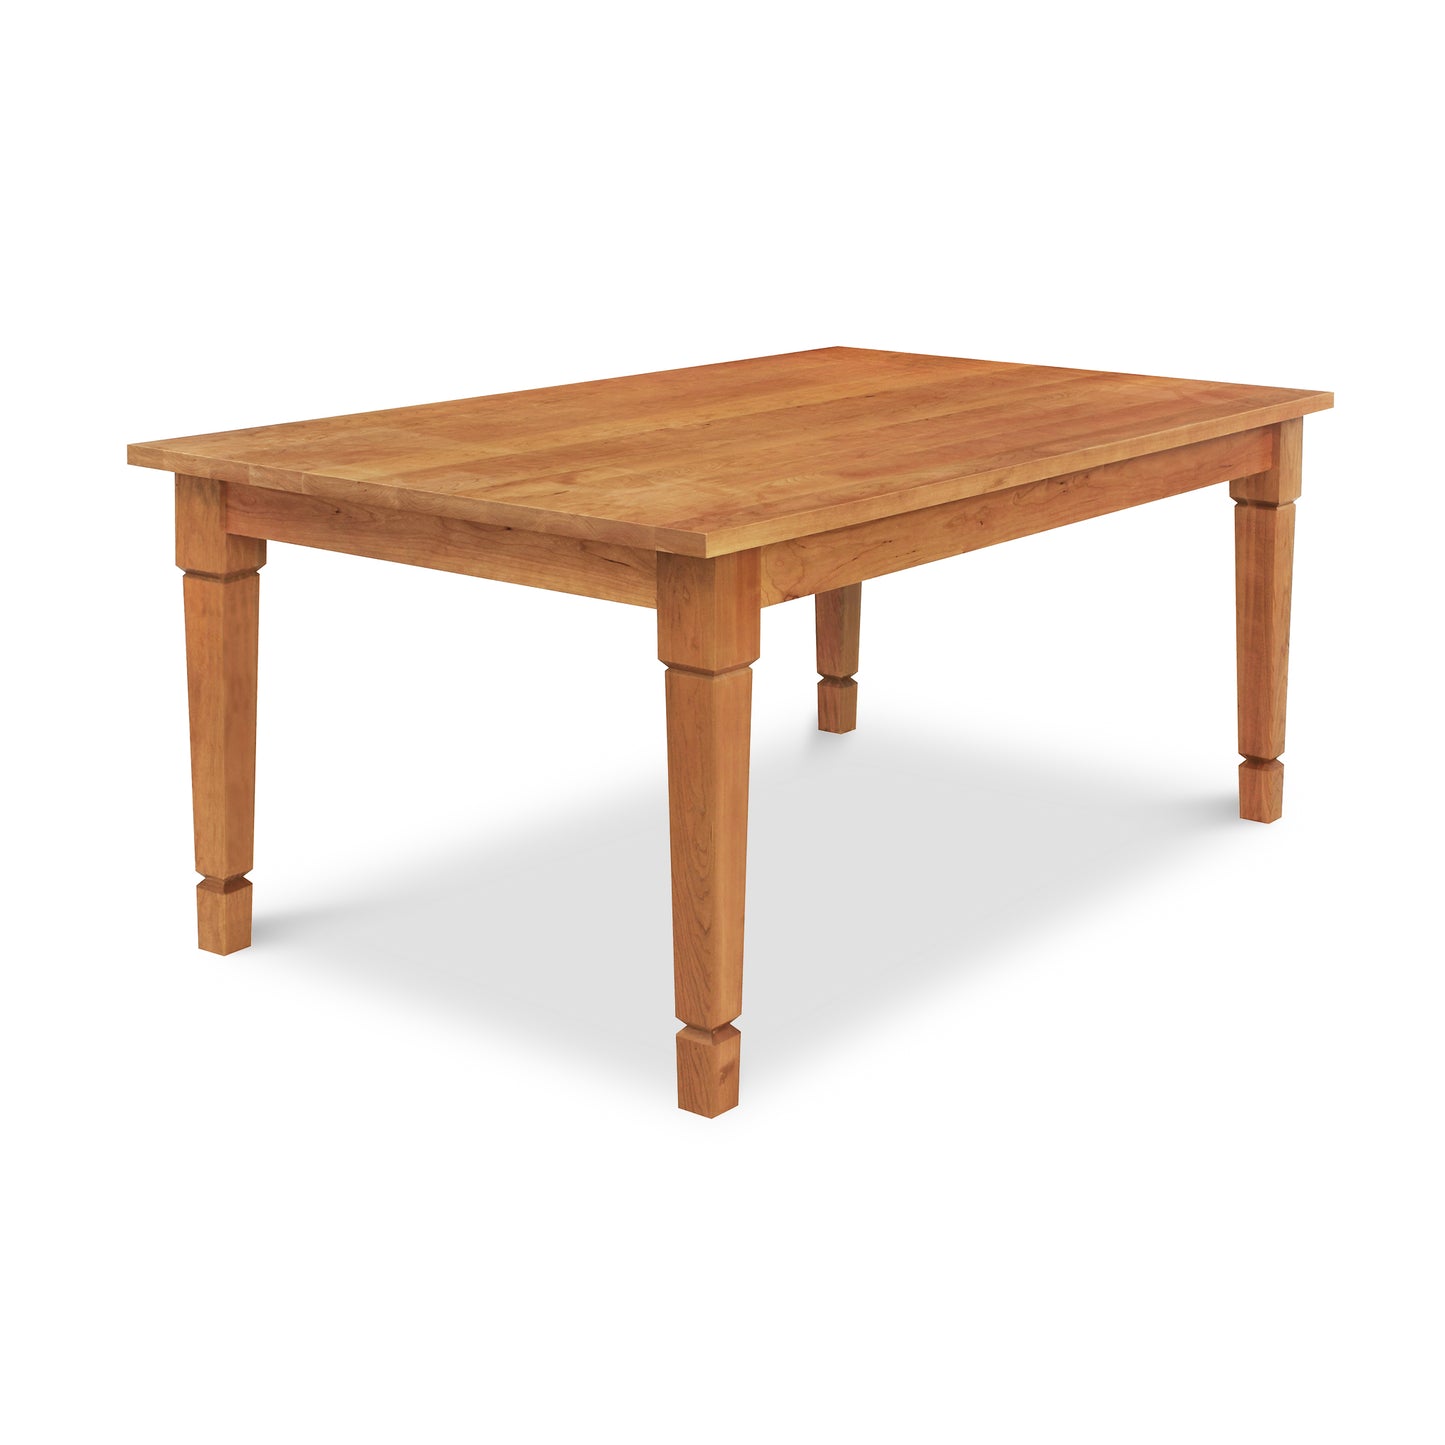 A Lyndon Furniture American Craftsman Solid Top Dining Table with four sturdy legs, made-to-order in Vermont from sustainably sourced hardwoods, on a white background.